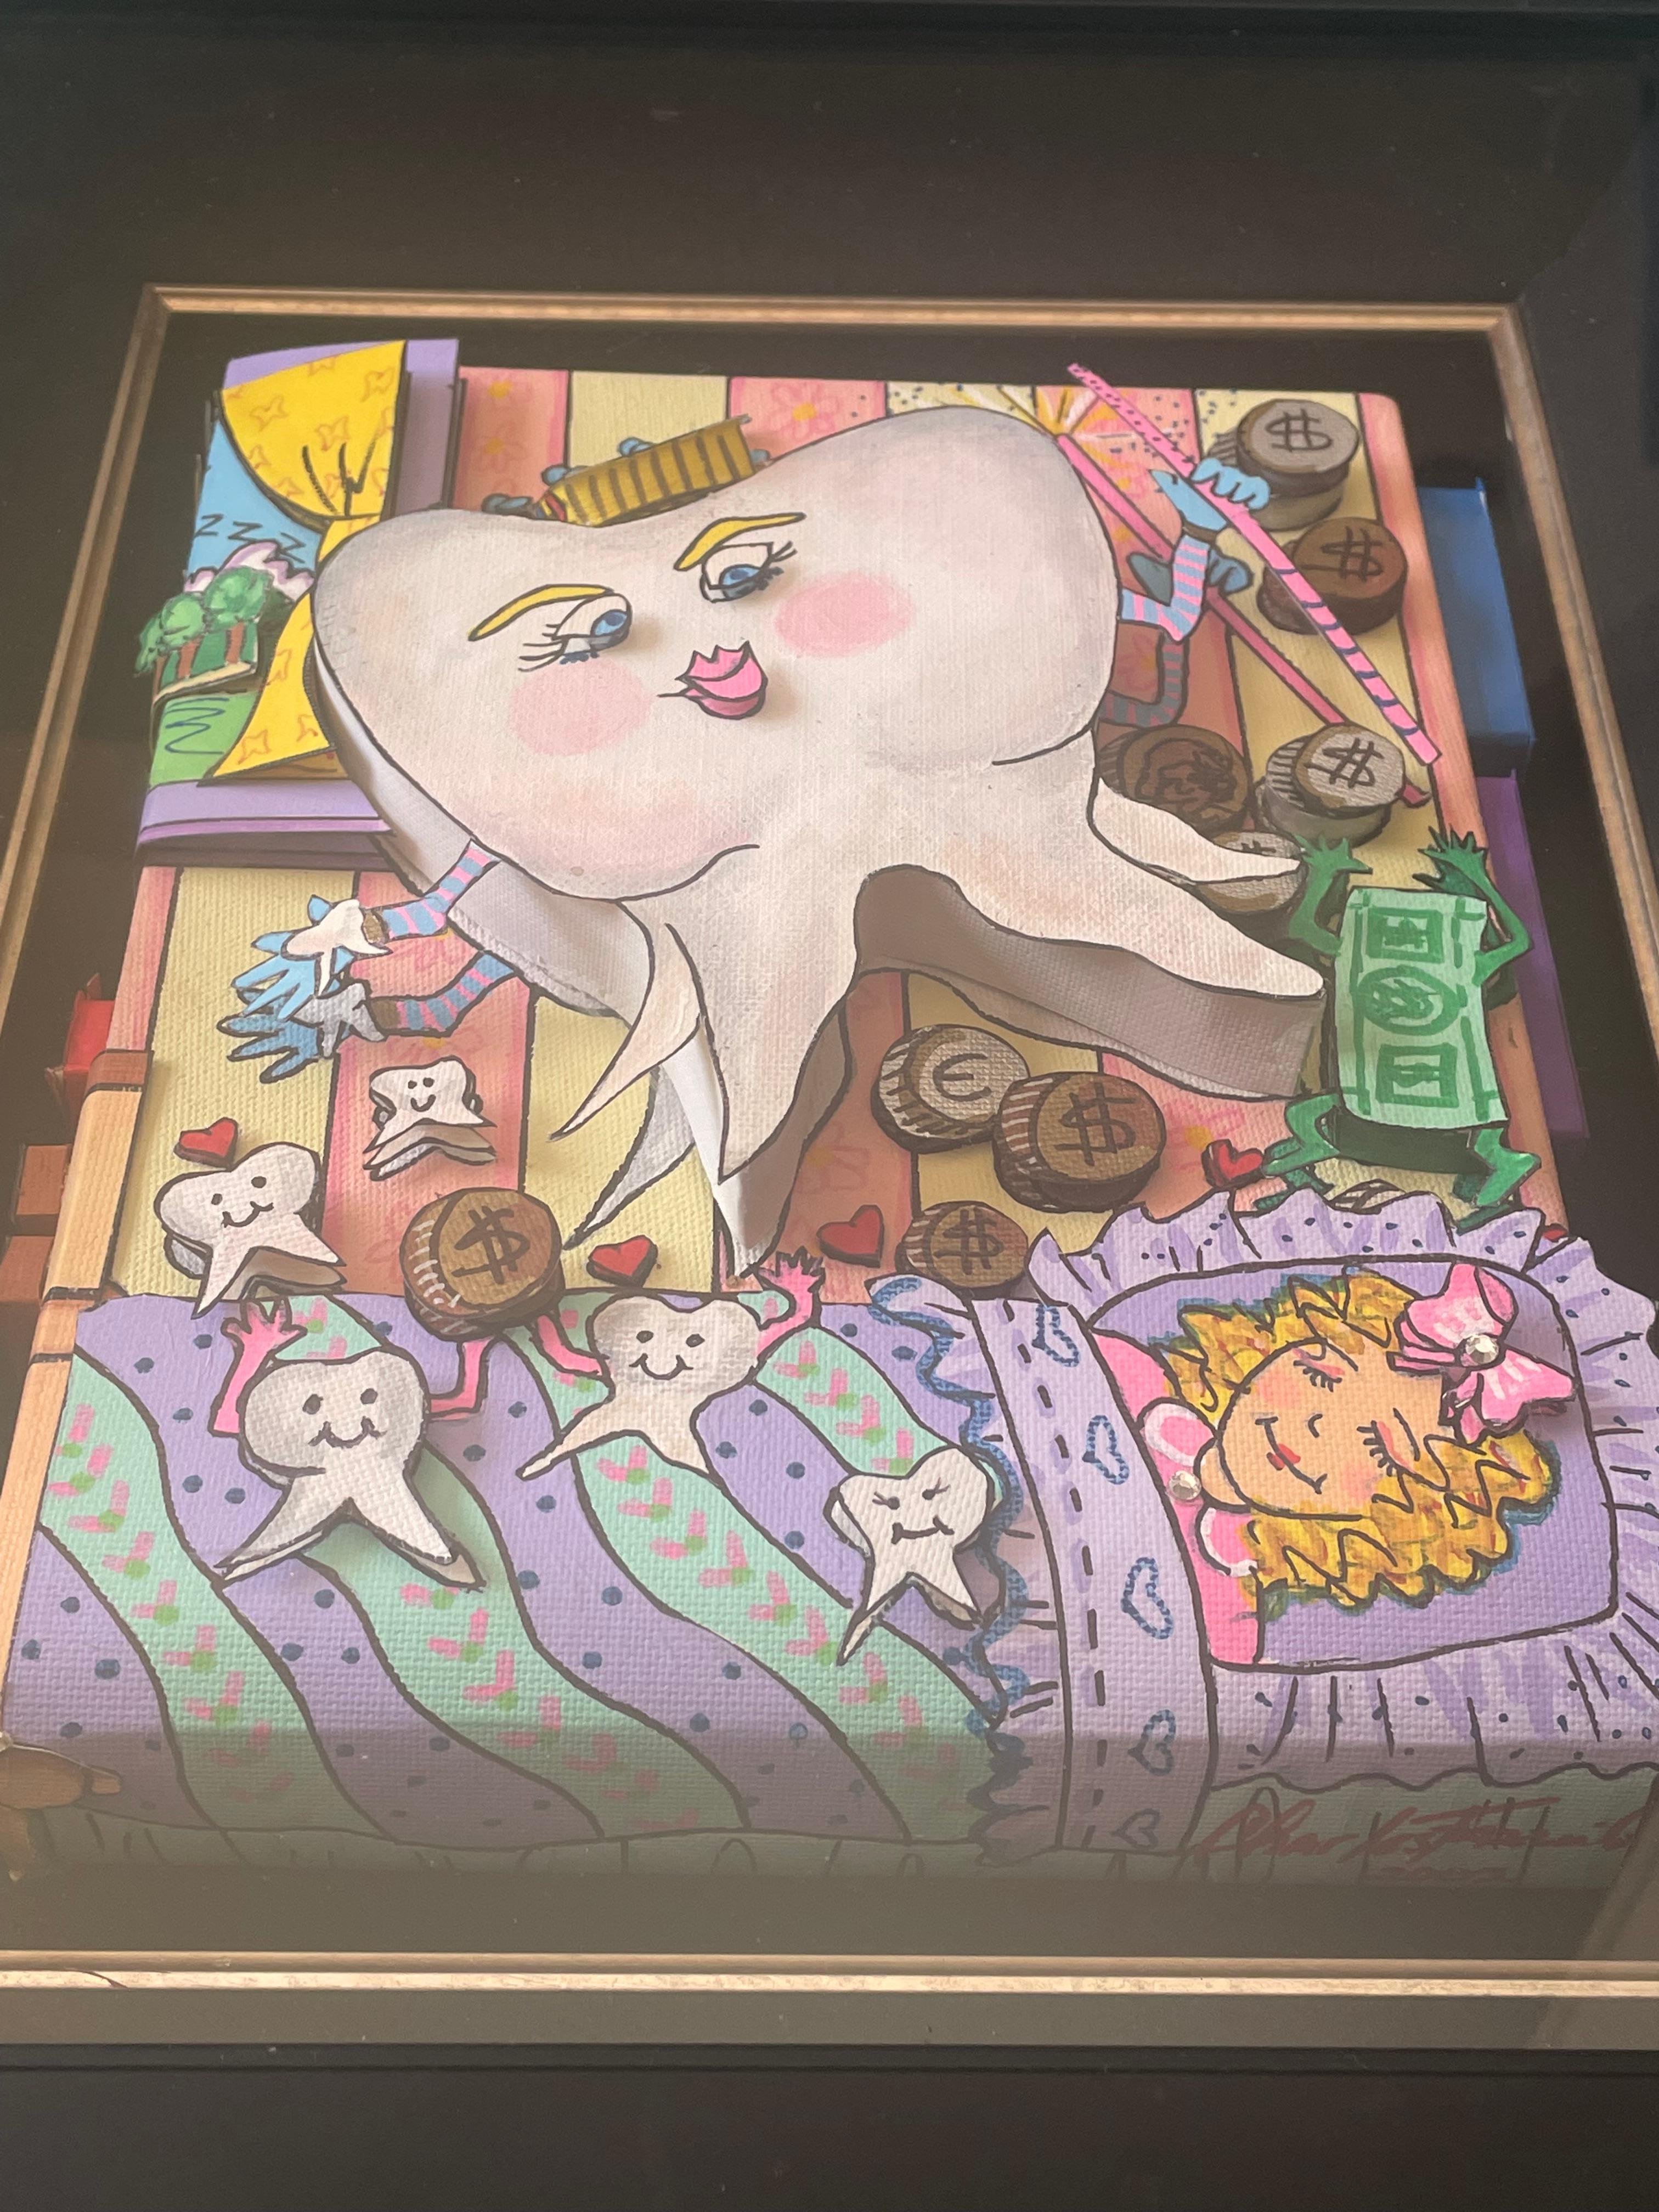 This is an Charles Fazzino original painting on canvas “tooth fairy”. Rare piece of fazzino in good condition. Measures 16x14